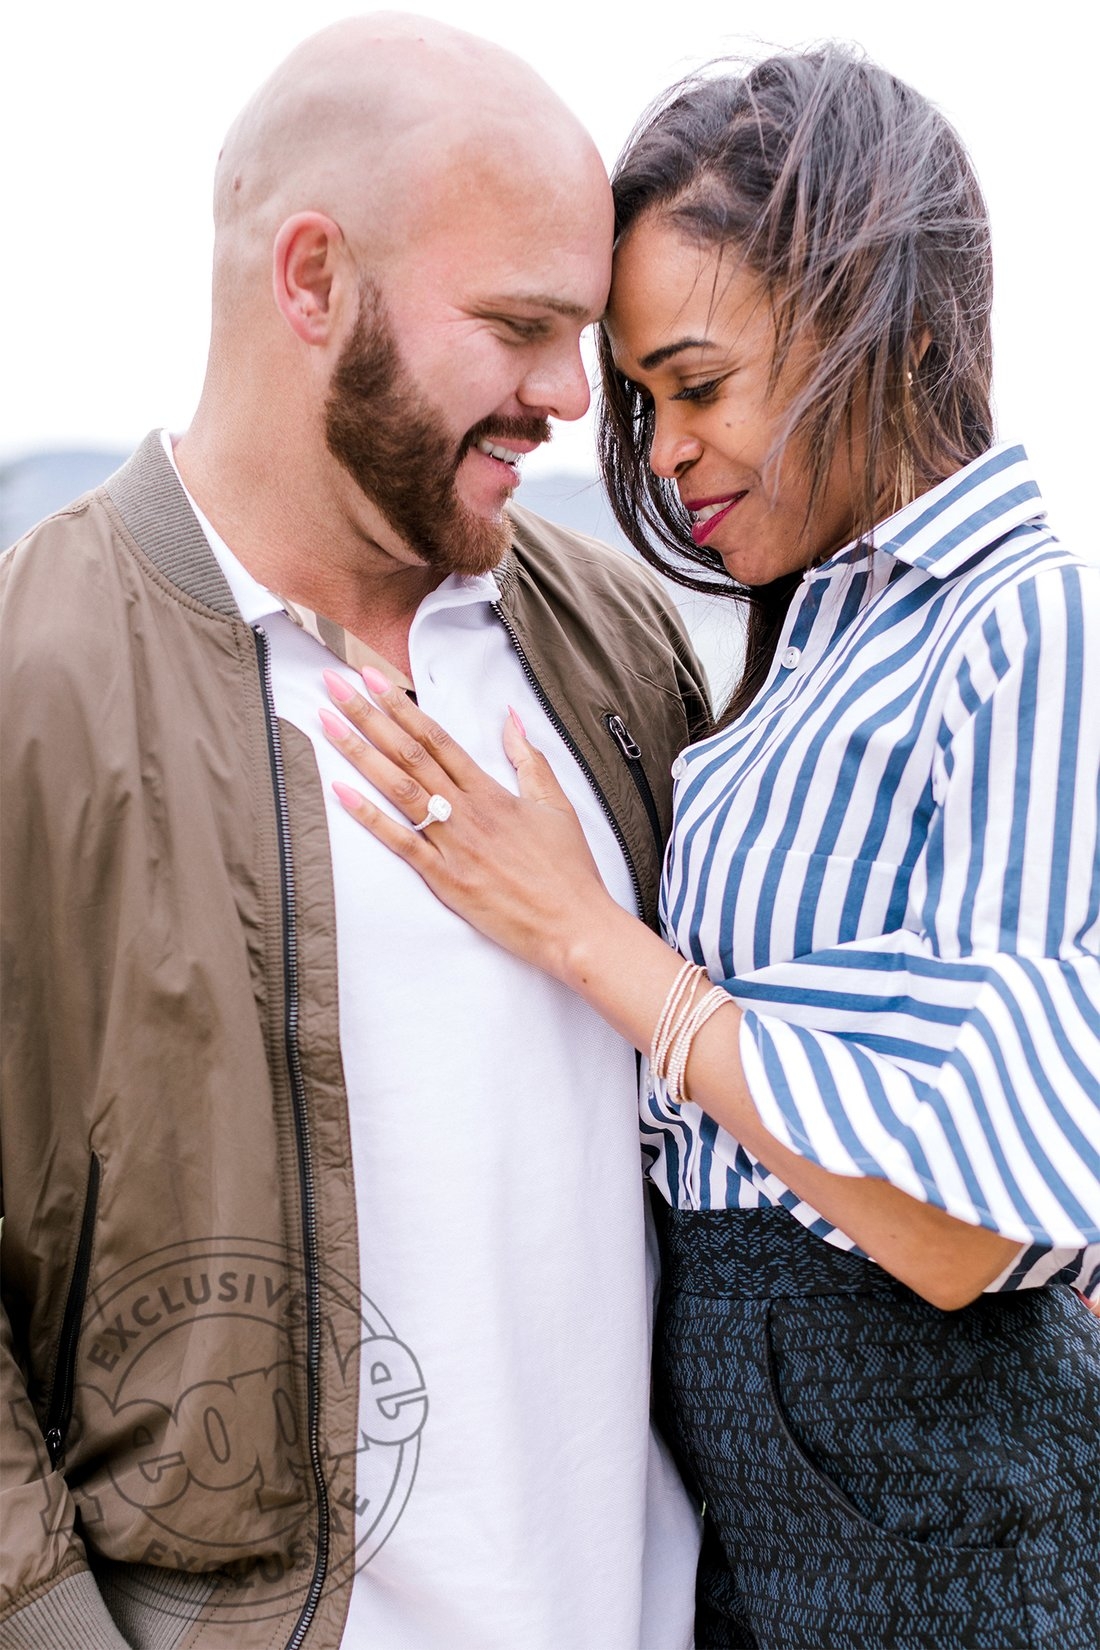 Michelle Williams of Destiny’s Child Engaged to Pastor Chad Johnson